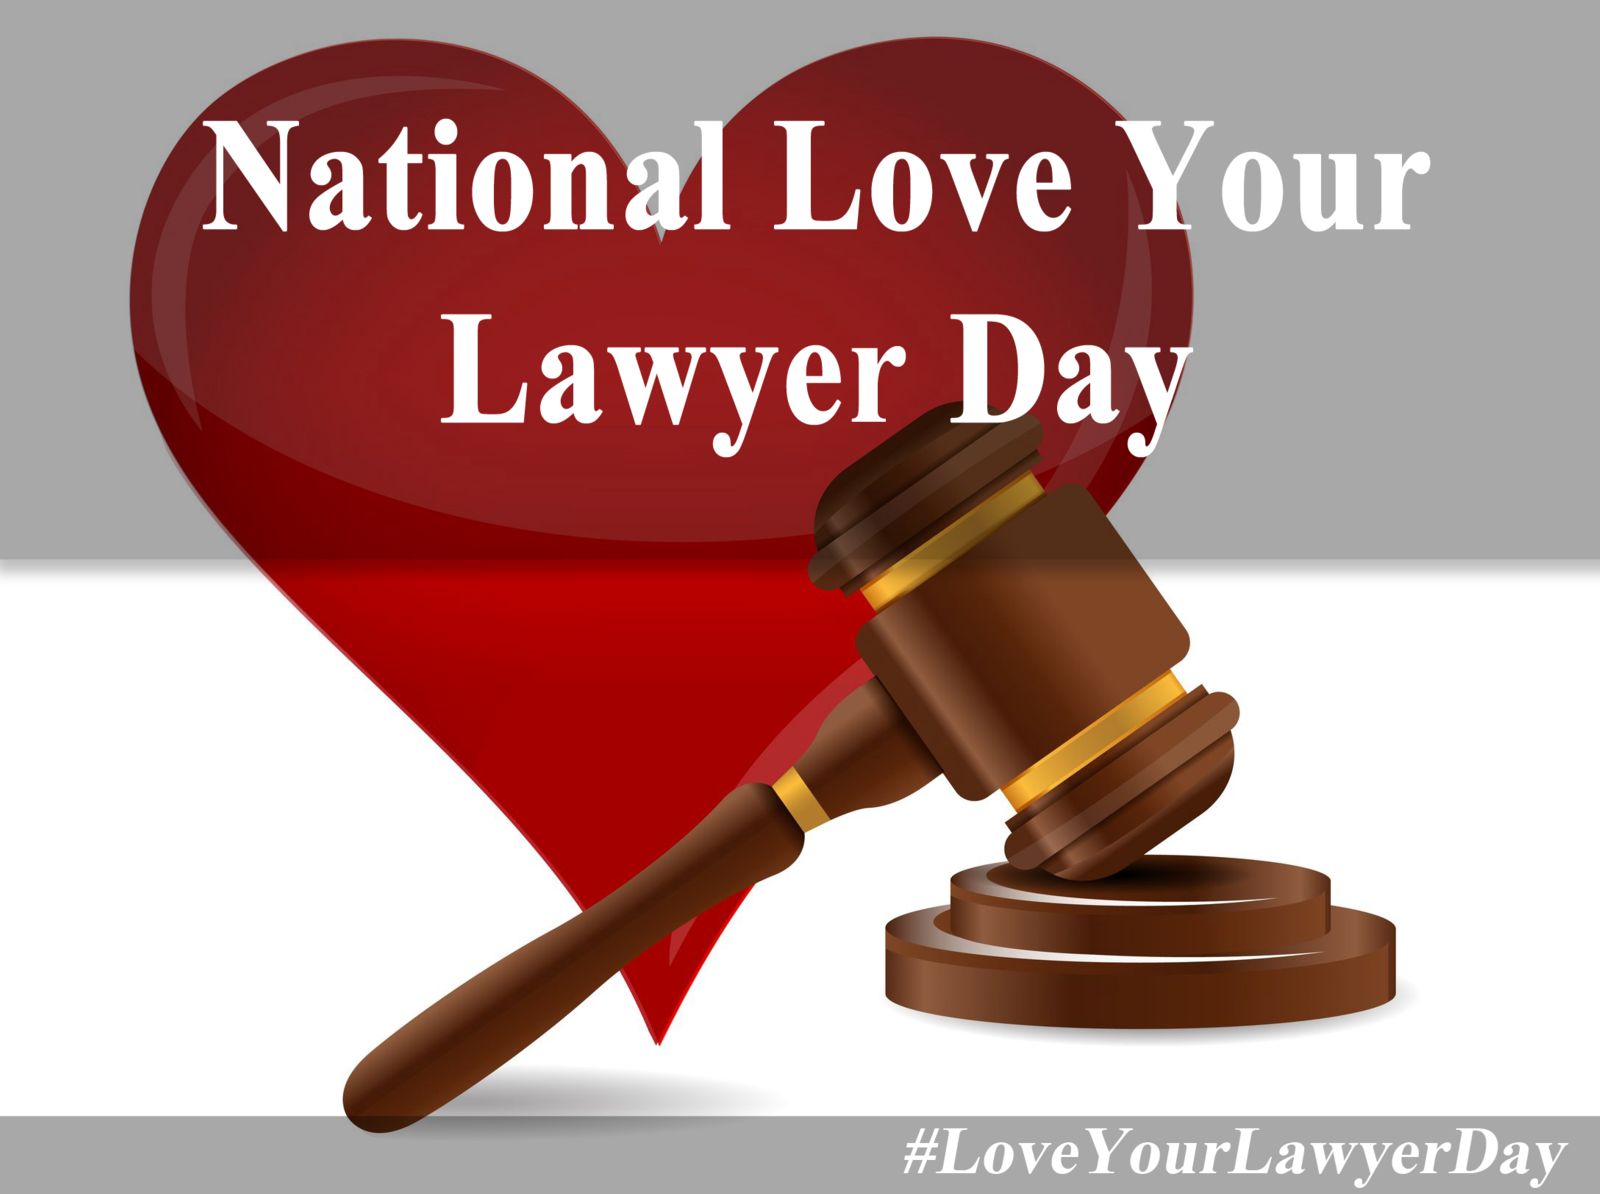 National love Your lawyer day graphic with a heart and judge's gavel.